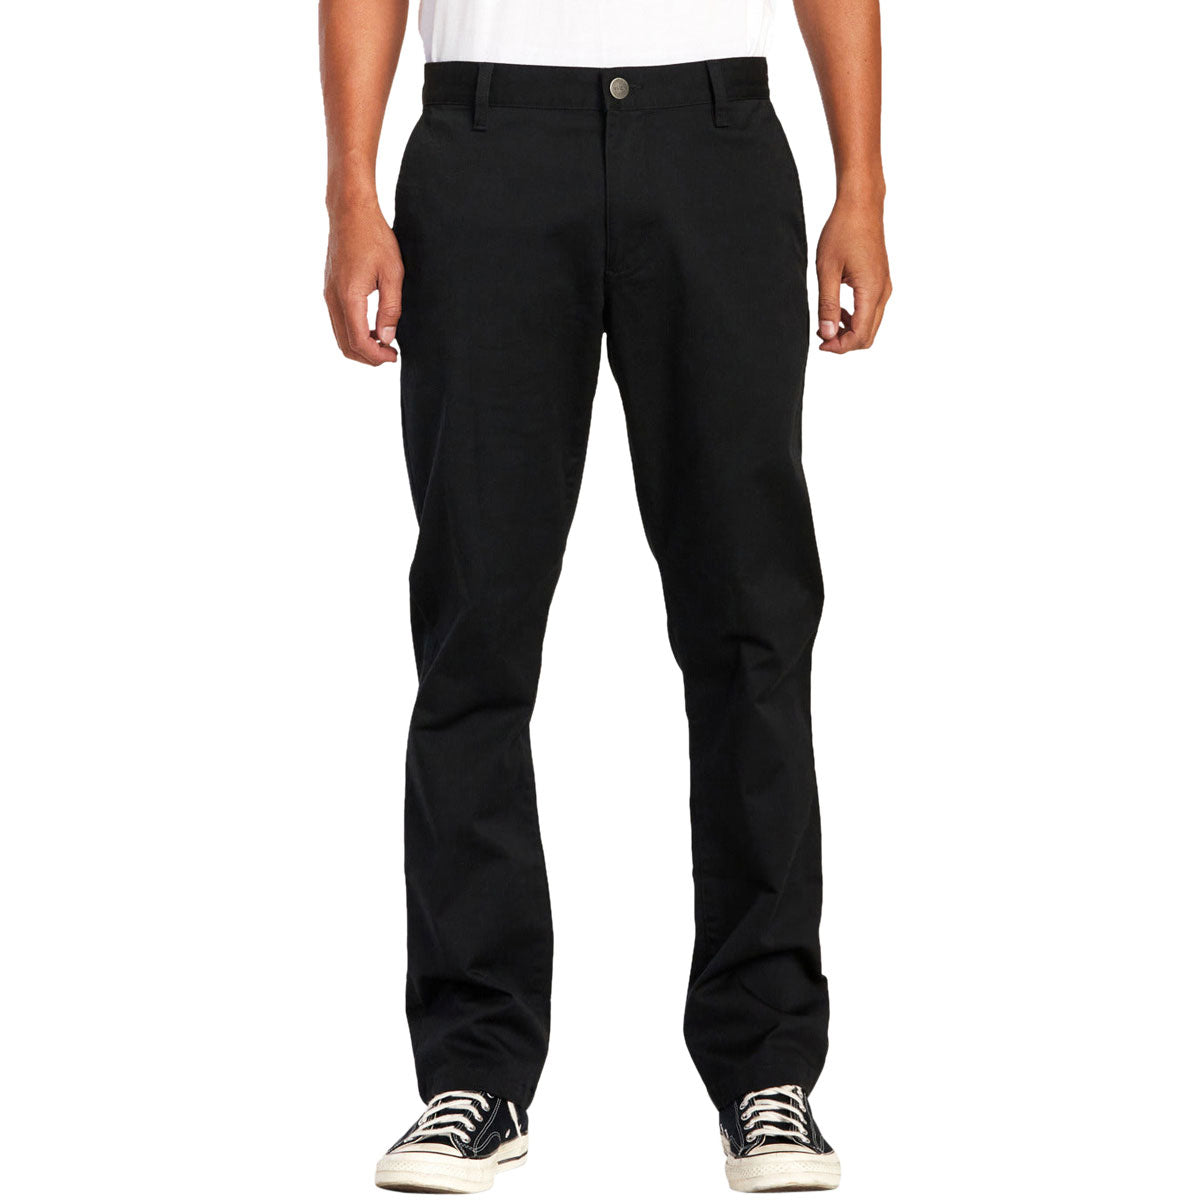 RVCA The Weekend Stretch Pants - New Black image 1